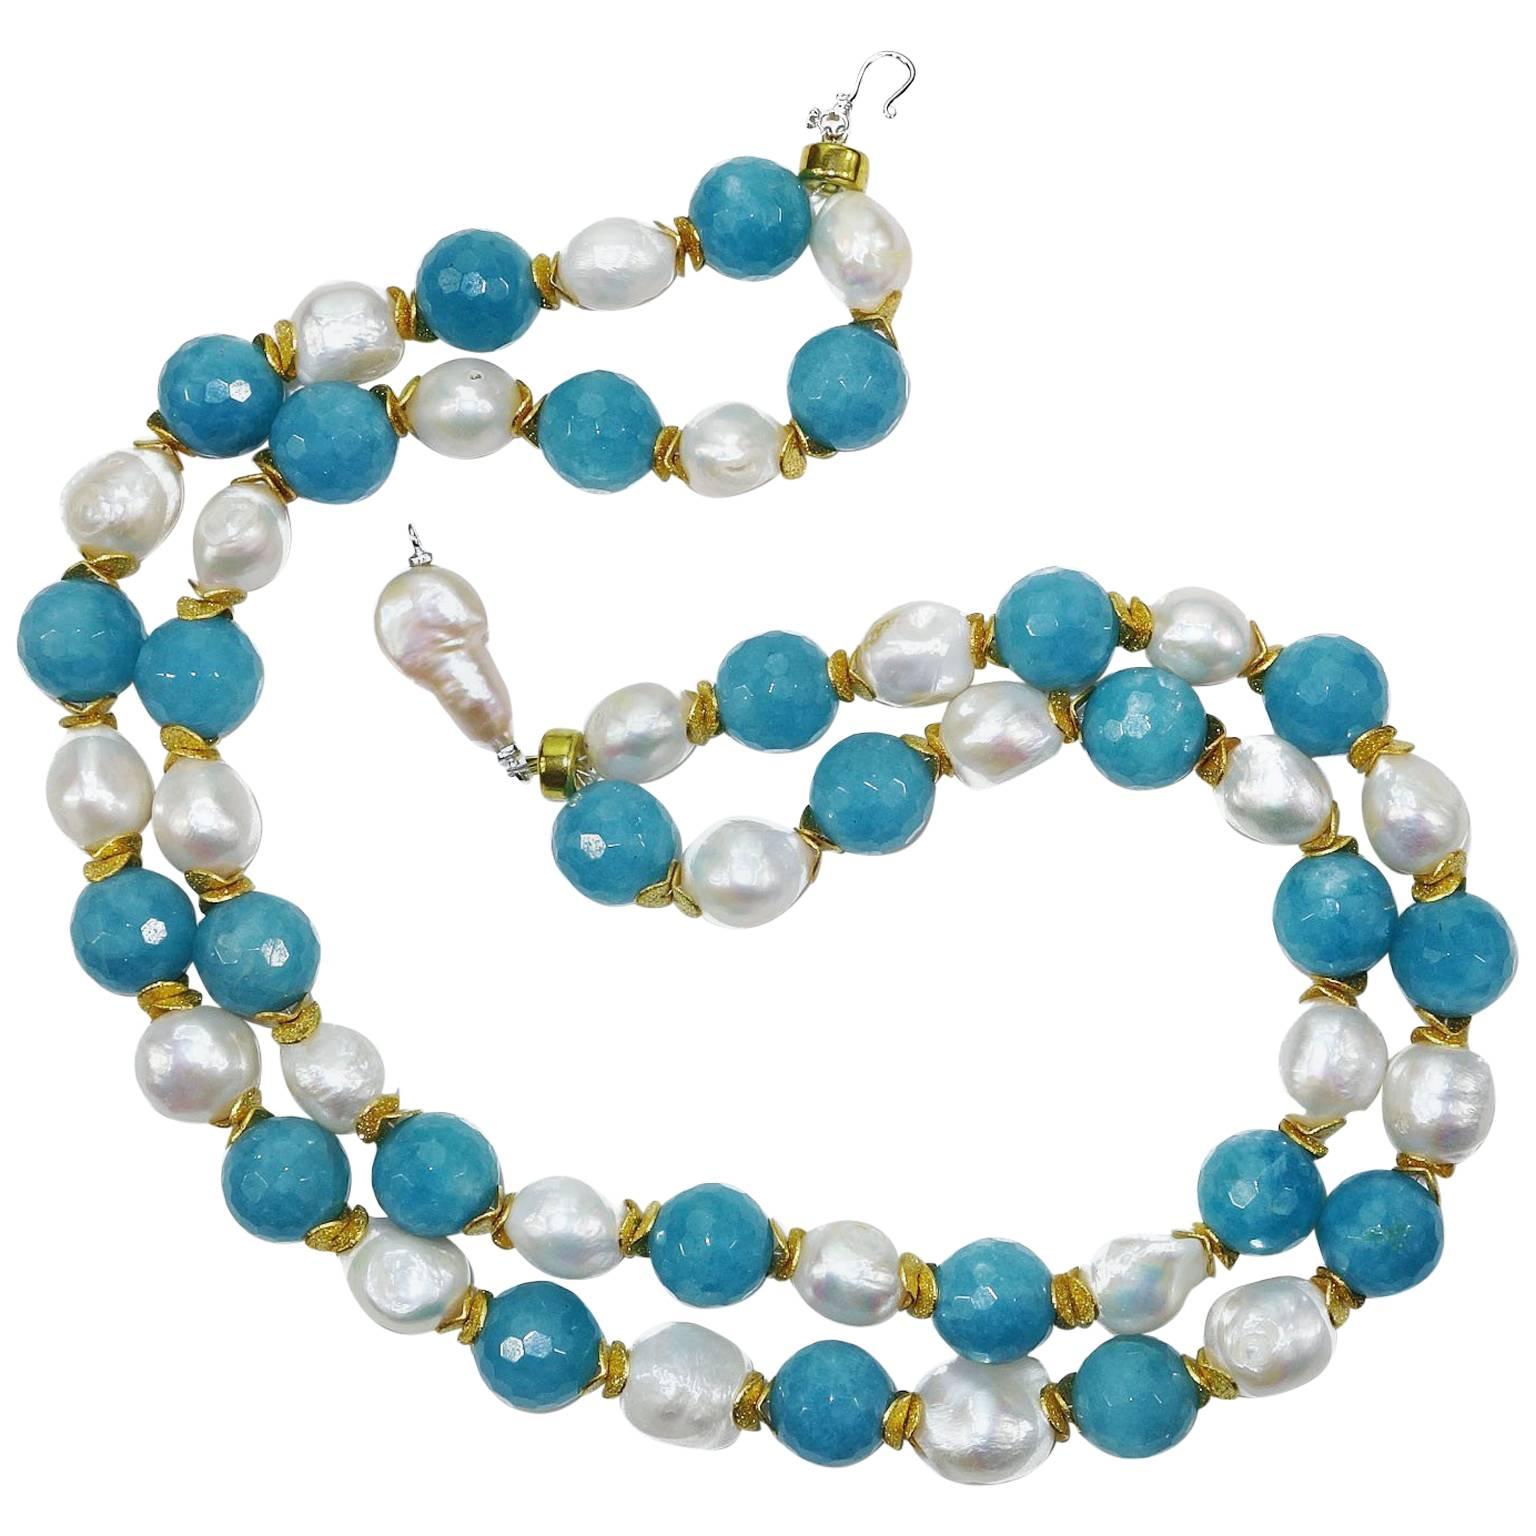 Double strand necklace of faceted (13mm) agate balls and irregular pearls separated by frosted gold tone spacers. Beautiful irregular pearl closure that can be focal secures the necklace. 18.5inches in length. Pearl is the June birthstone.
